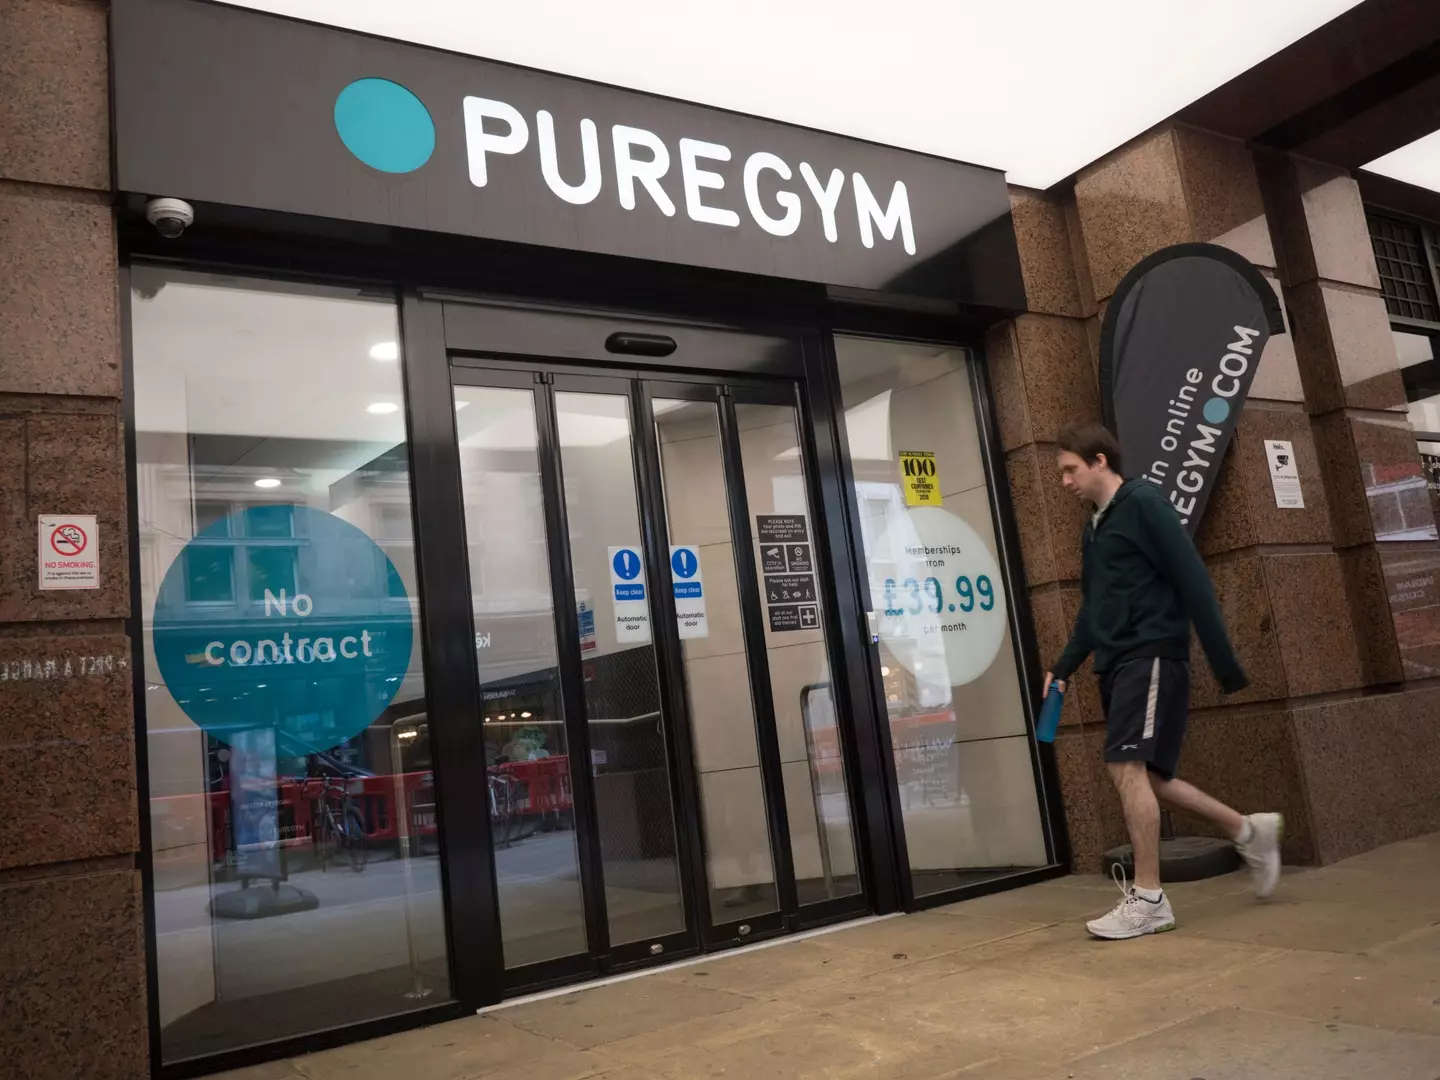 PureGym are cracking down on people who don't put their weights back after using them.